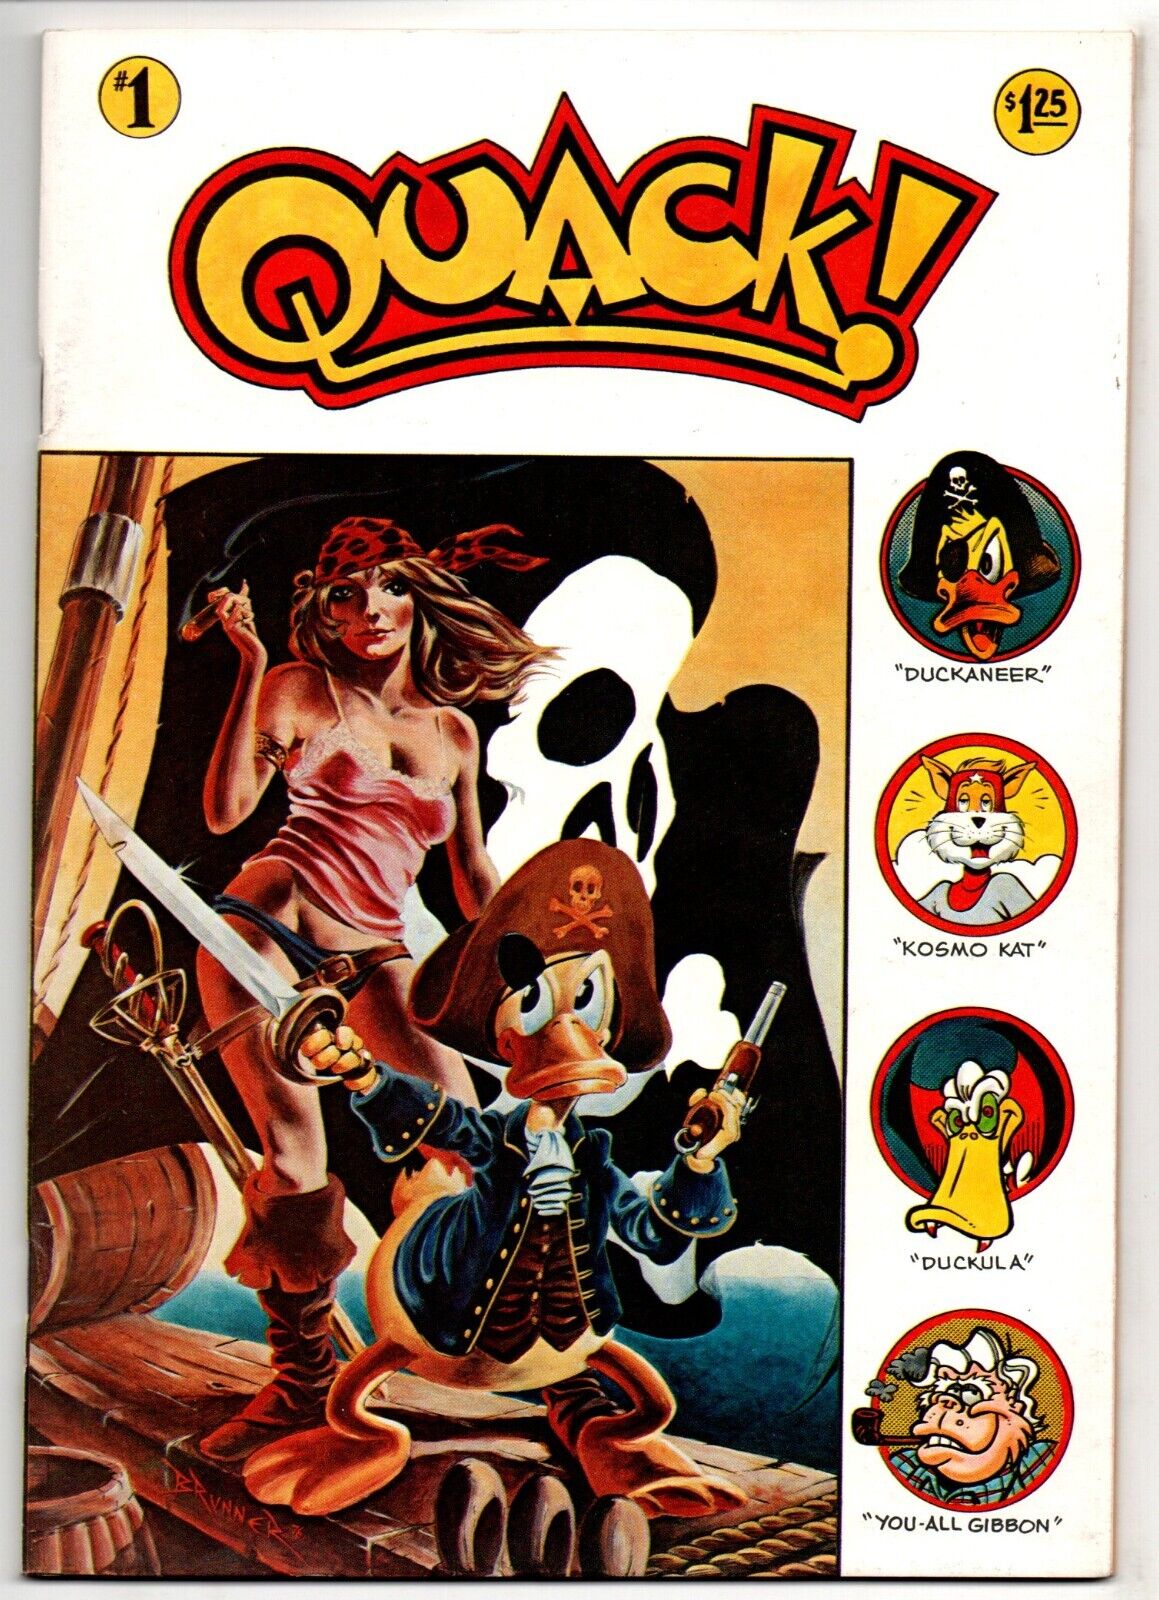 Quack #1 (1976)  STAR*REACH PRODUCTIONS - Cover art by Frank Brunner